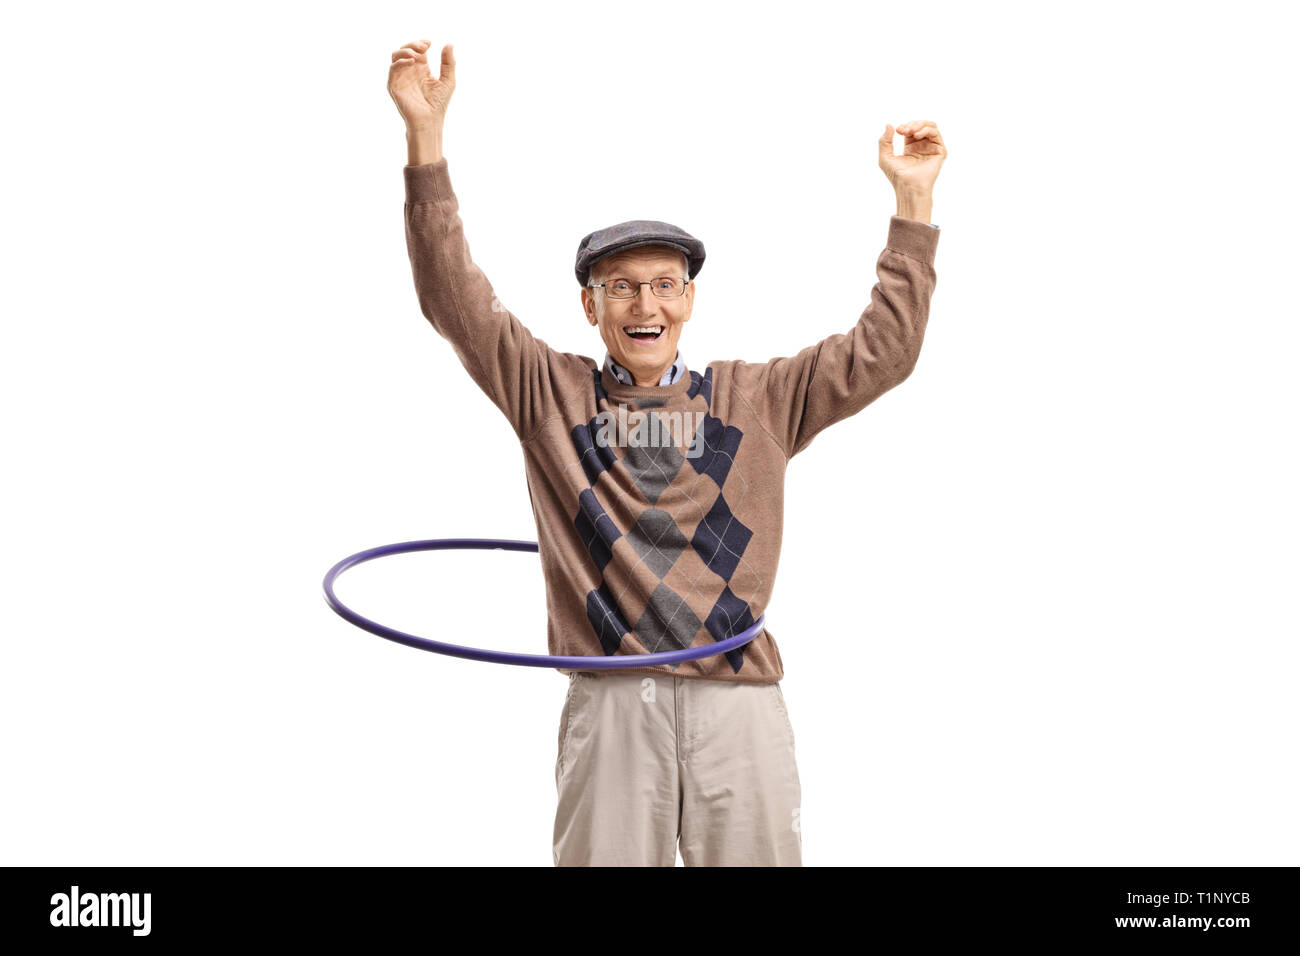 Senior man raising hands with a hula hoop isolated on white background Stock Photo